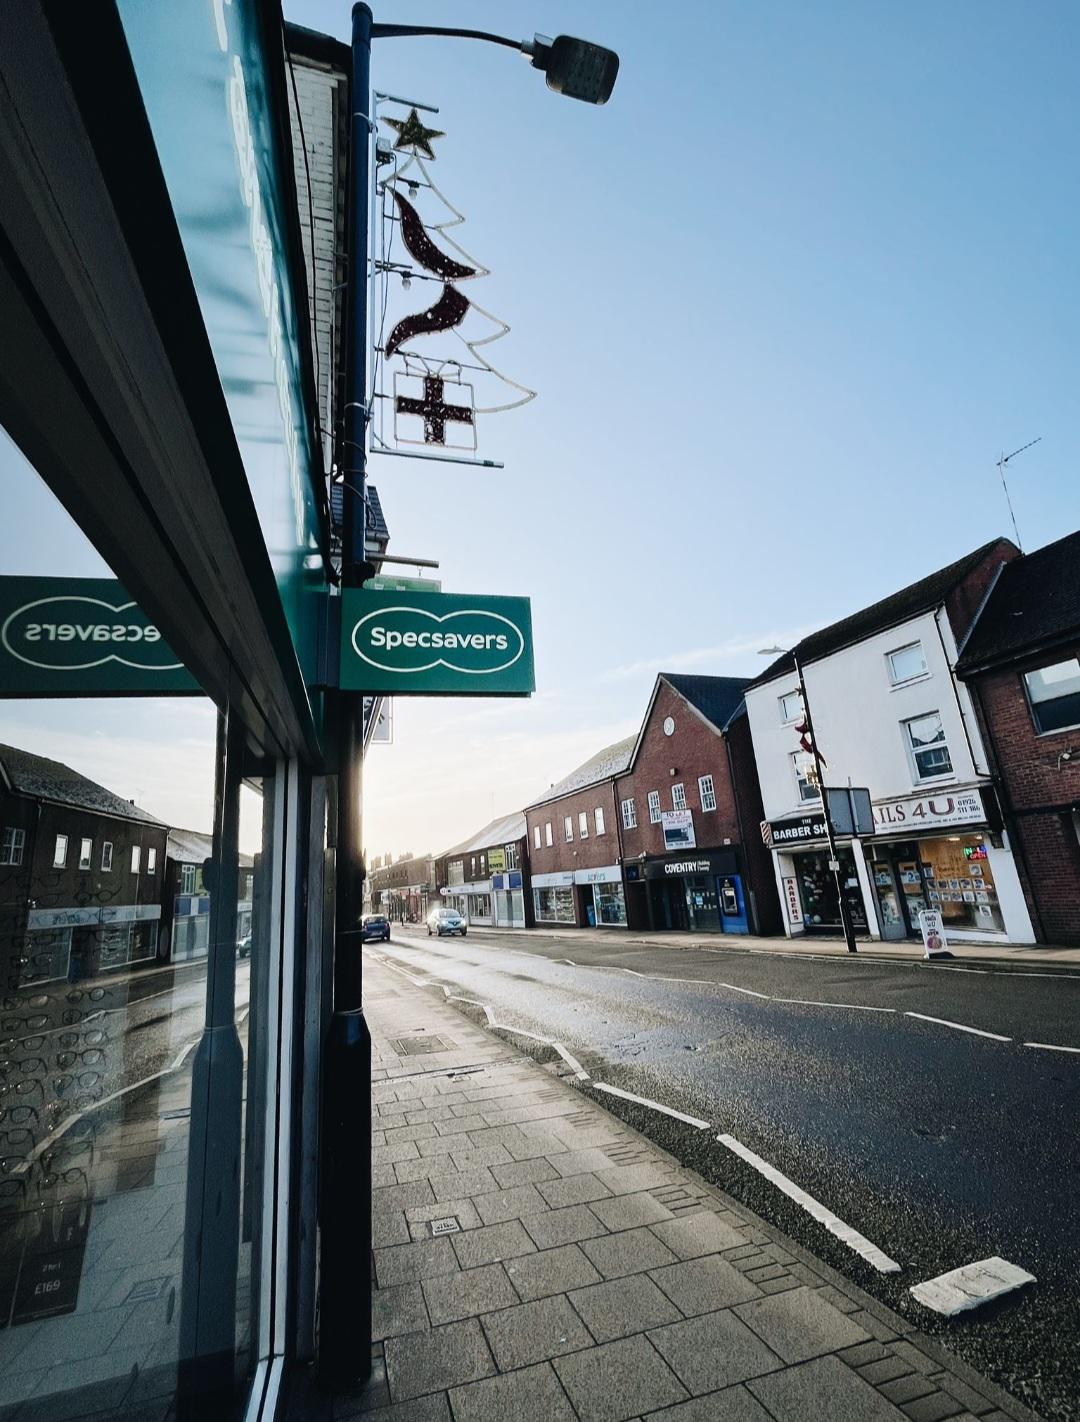 Specsavers Kenilworth Specsavers Opticians and Audiologists - Kenilworth Kenilworth 01926 865030